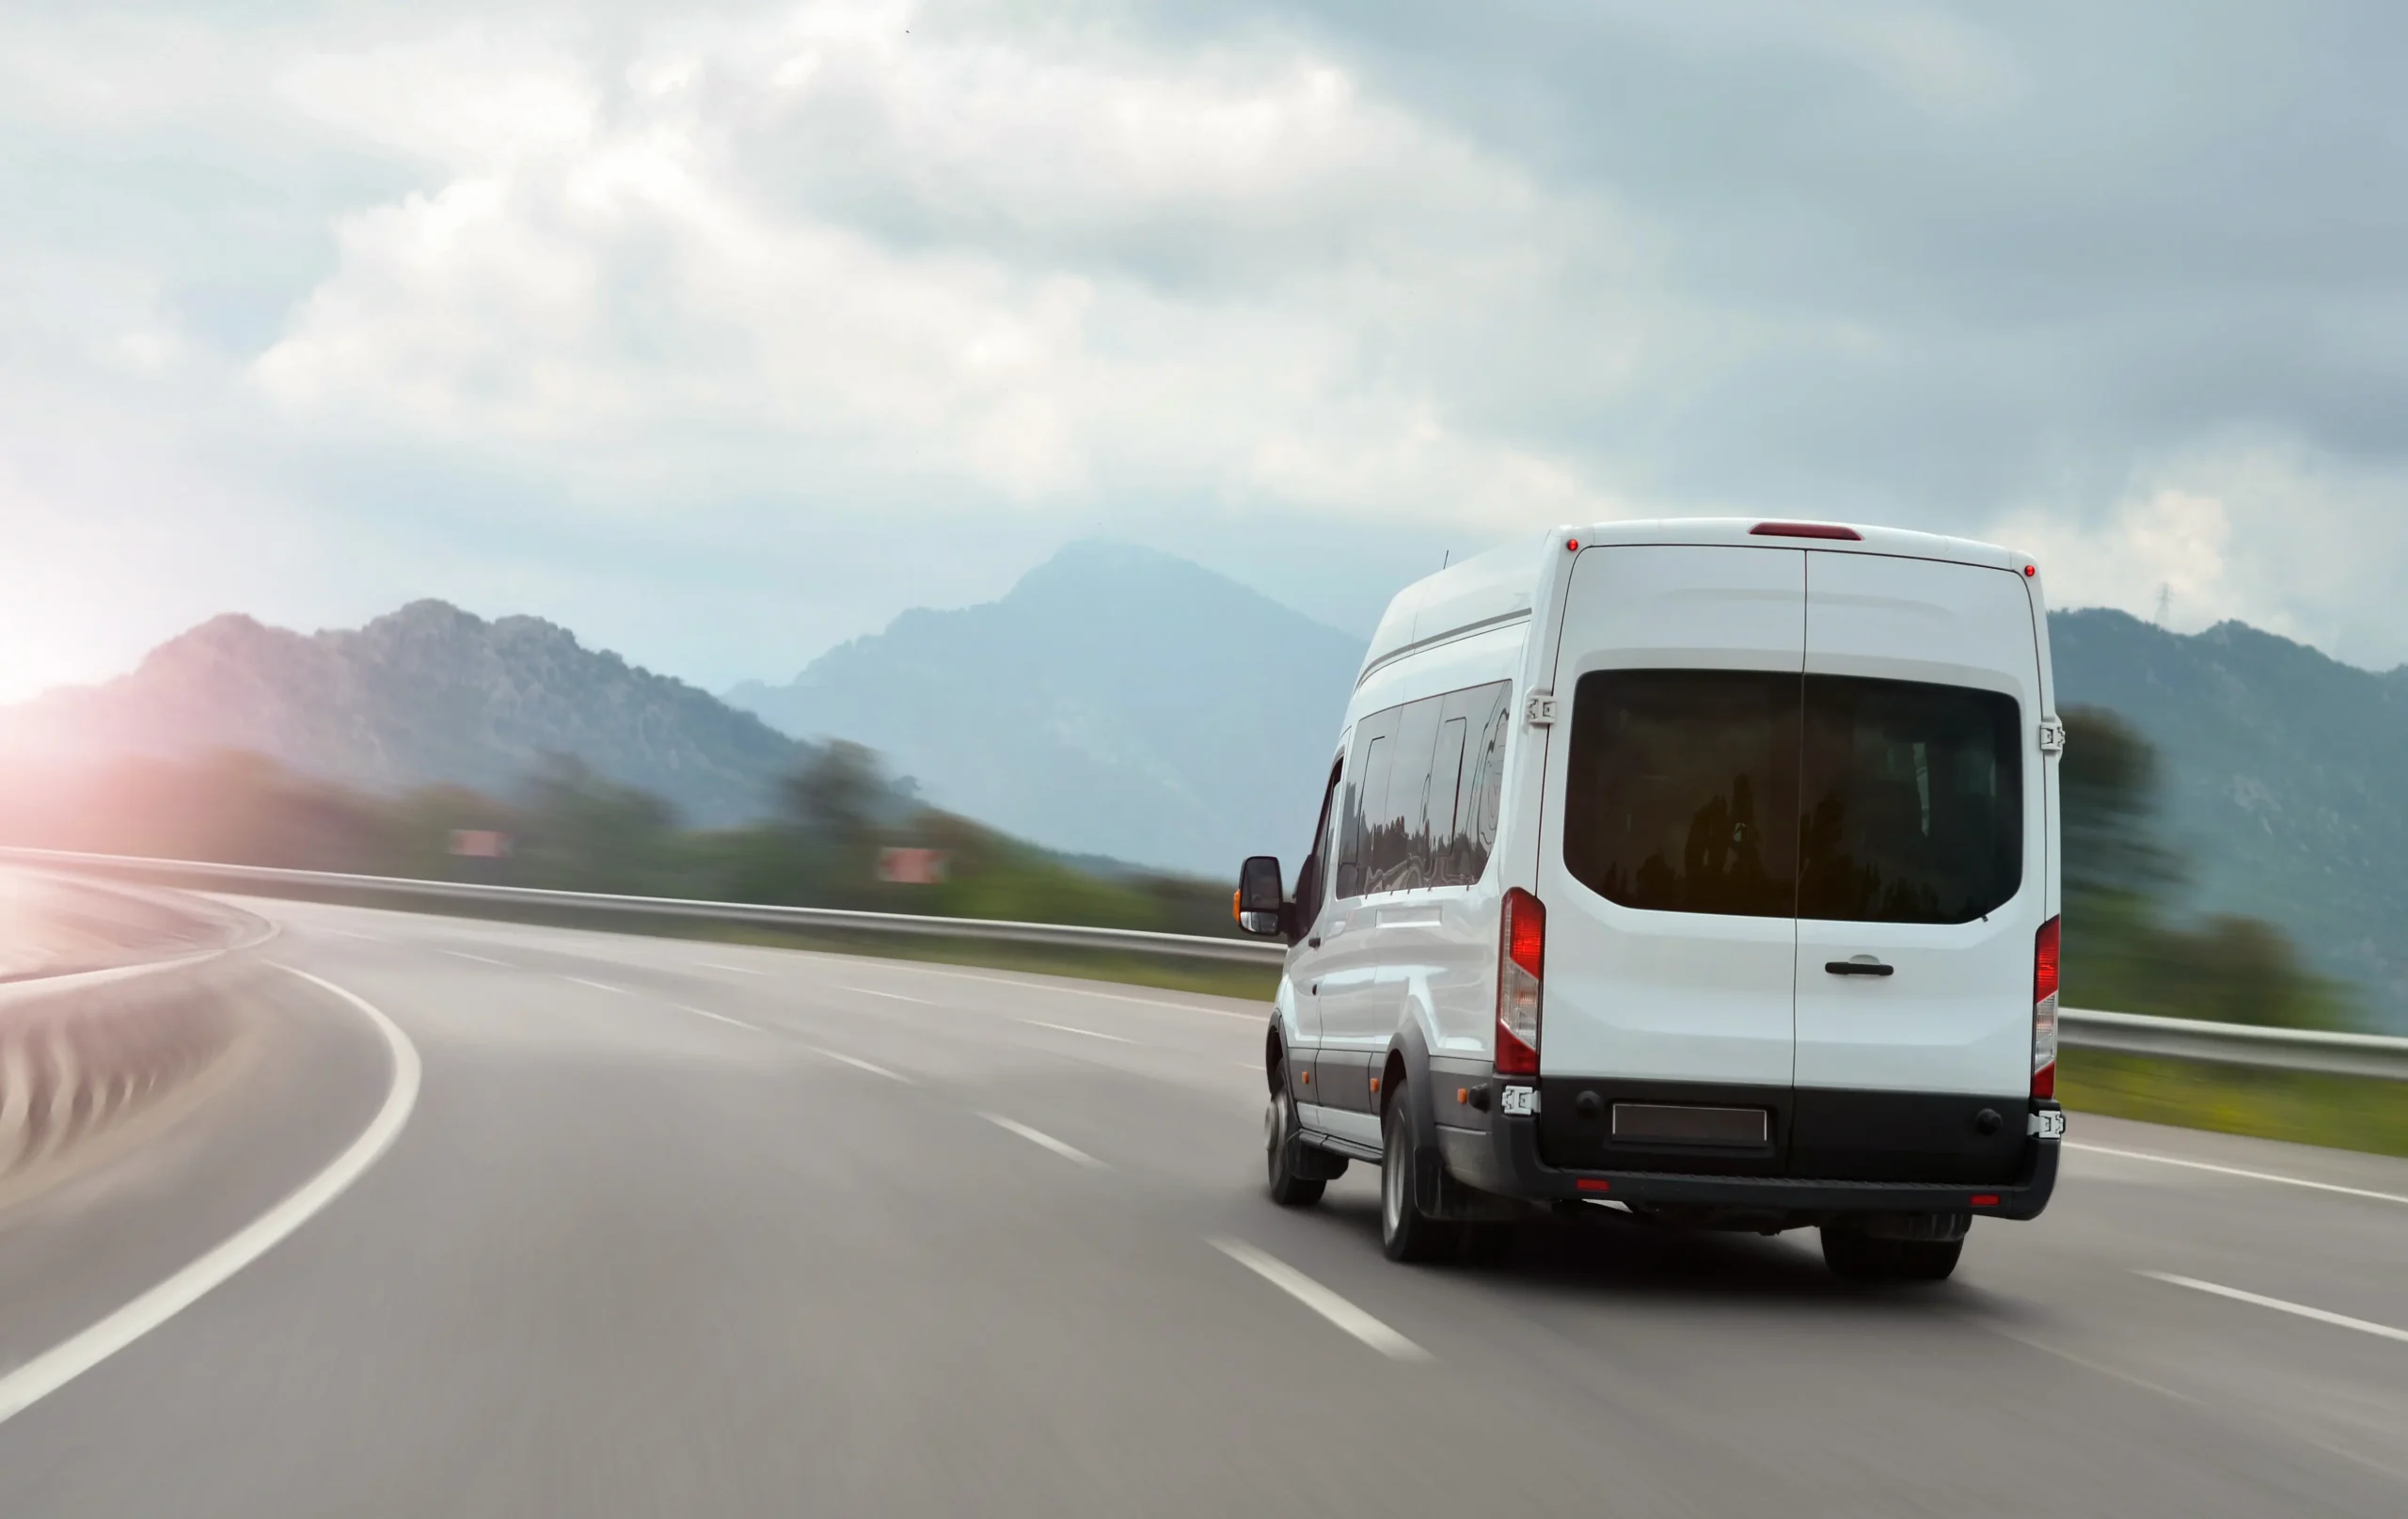 Man drives Sprinter van with ease on highway